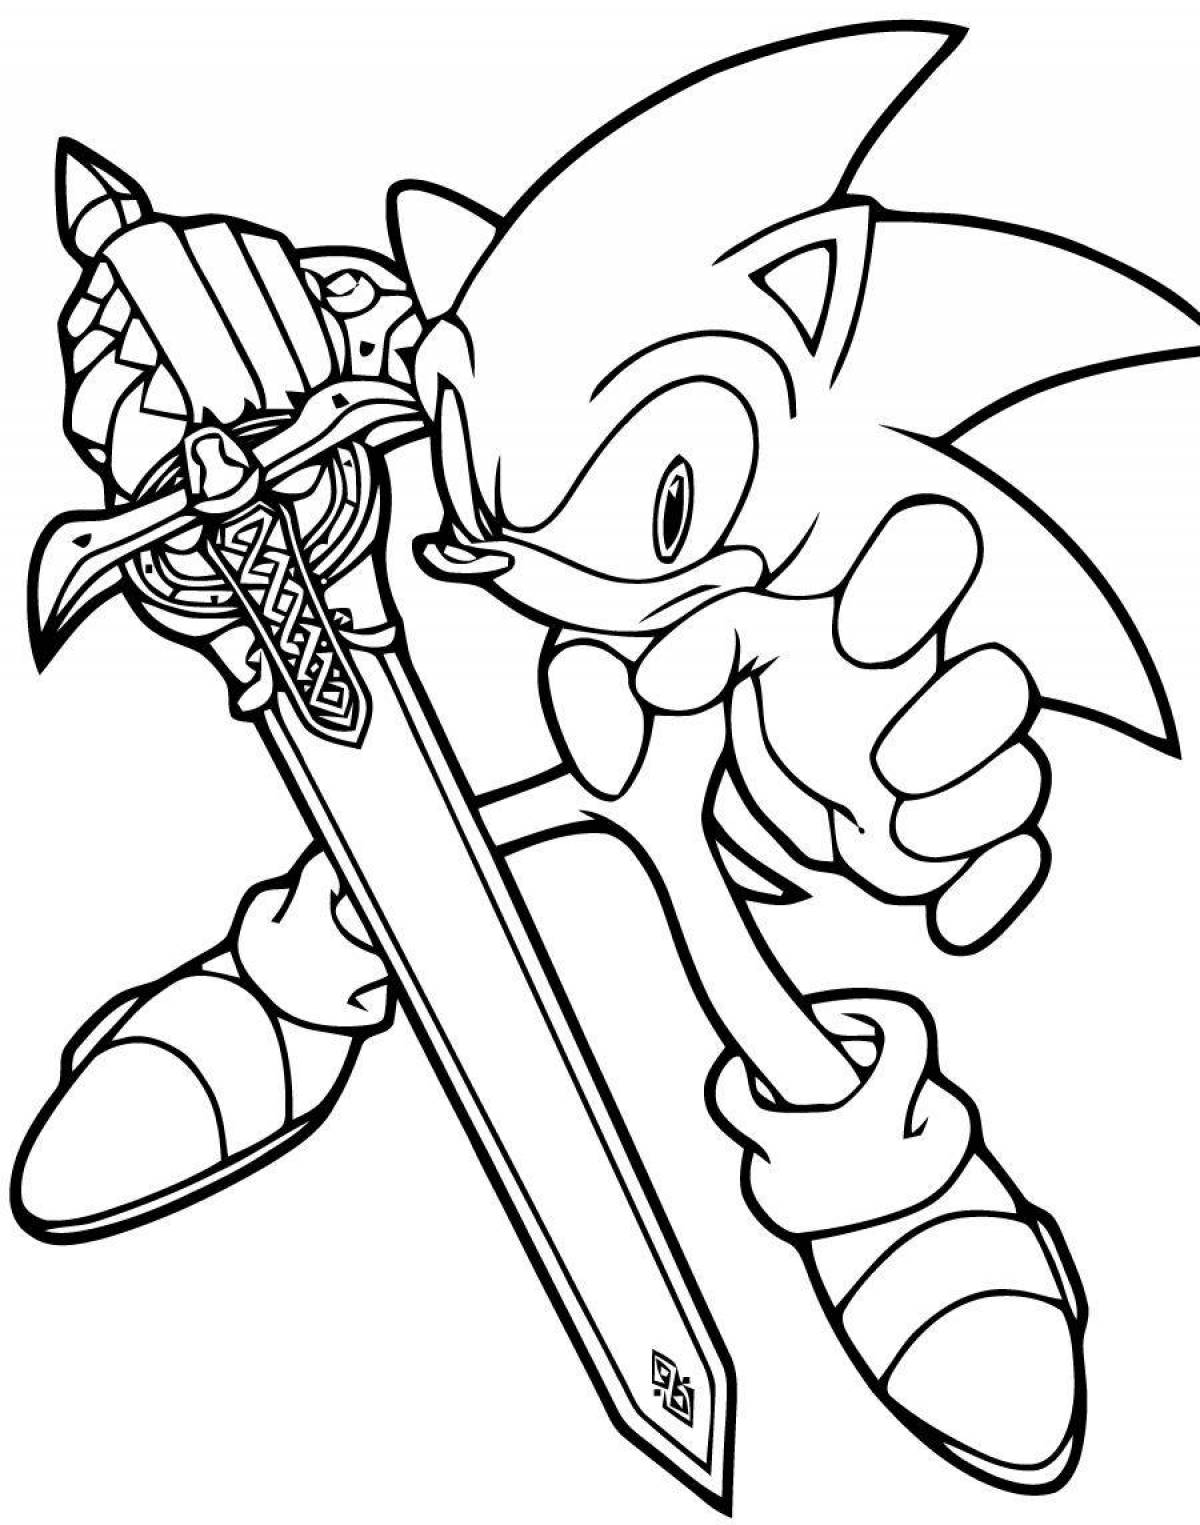 Fascinating golden sonic coloring page